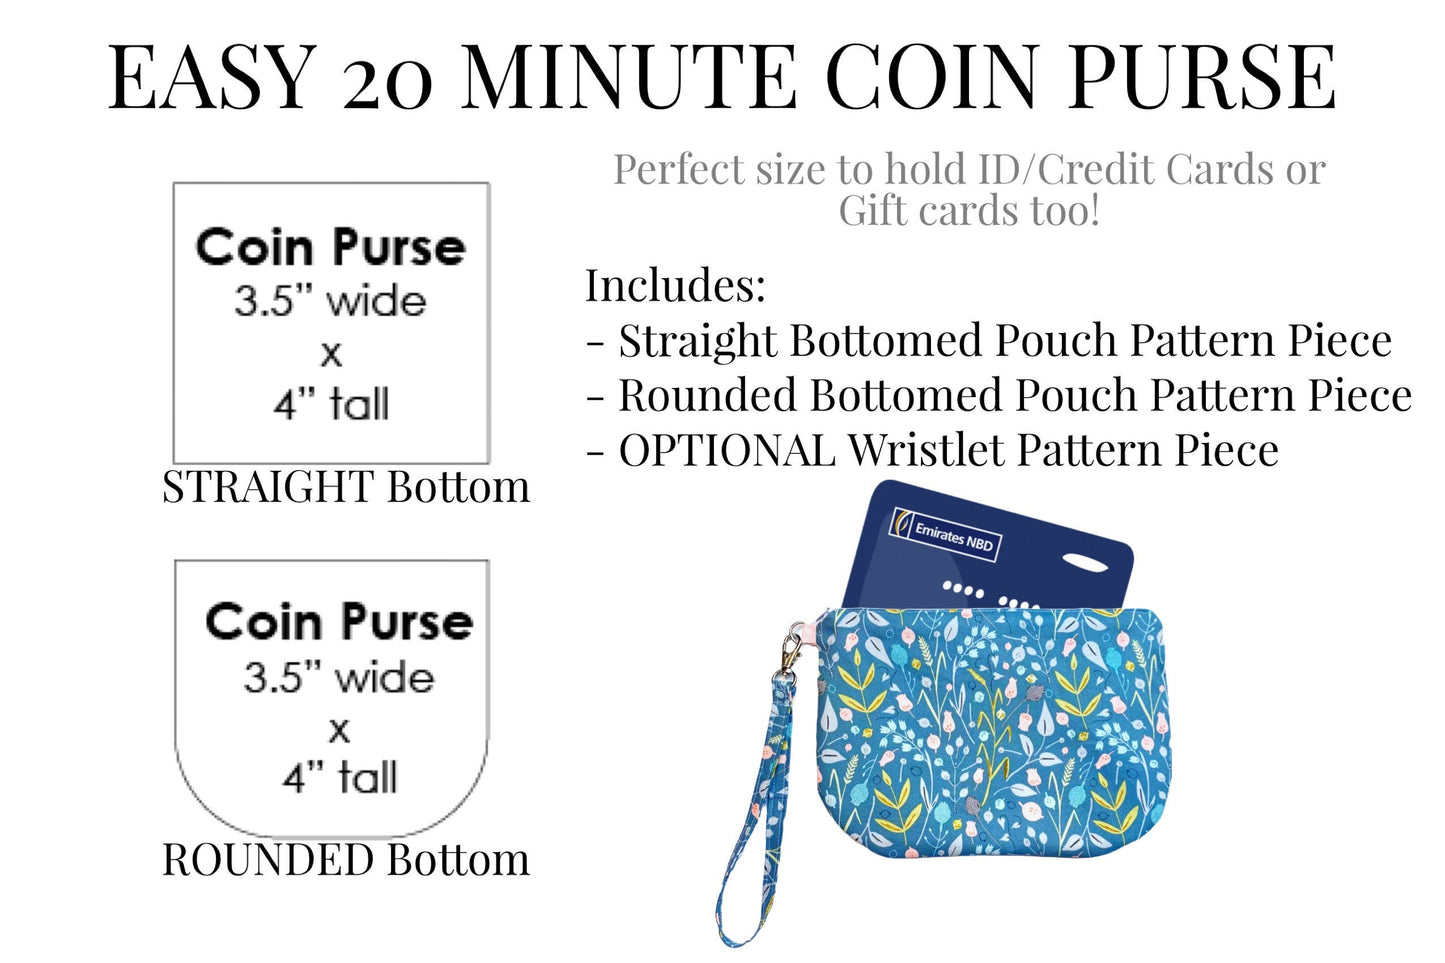 Credit Card and ID Coin Purse